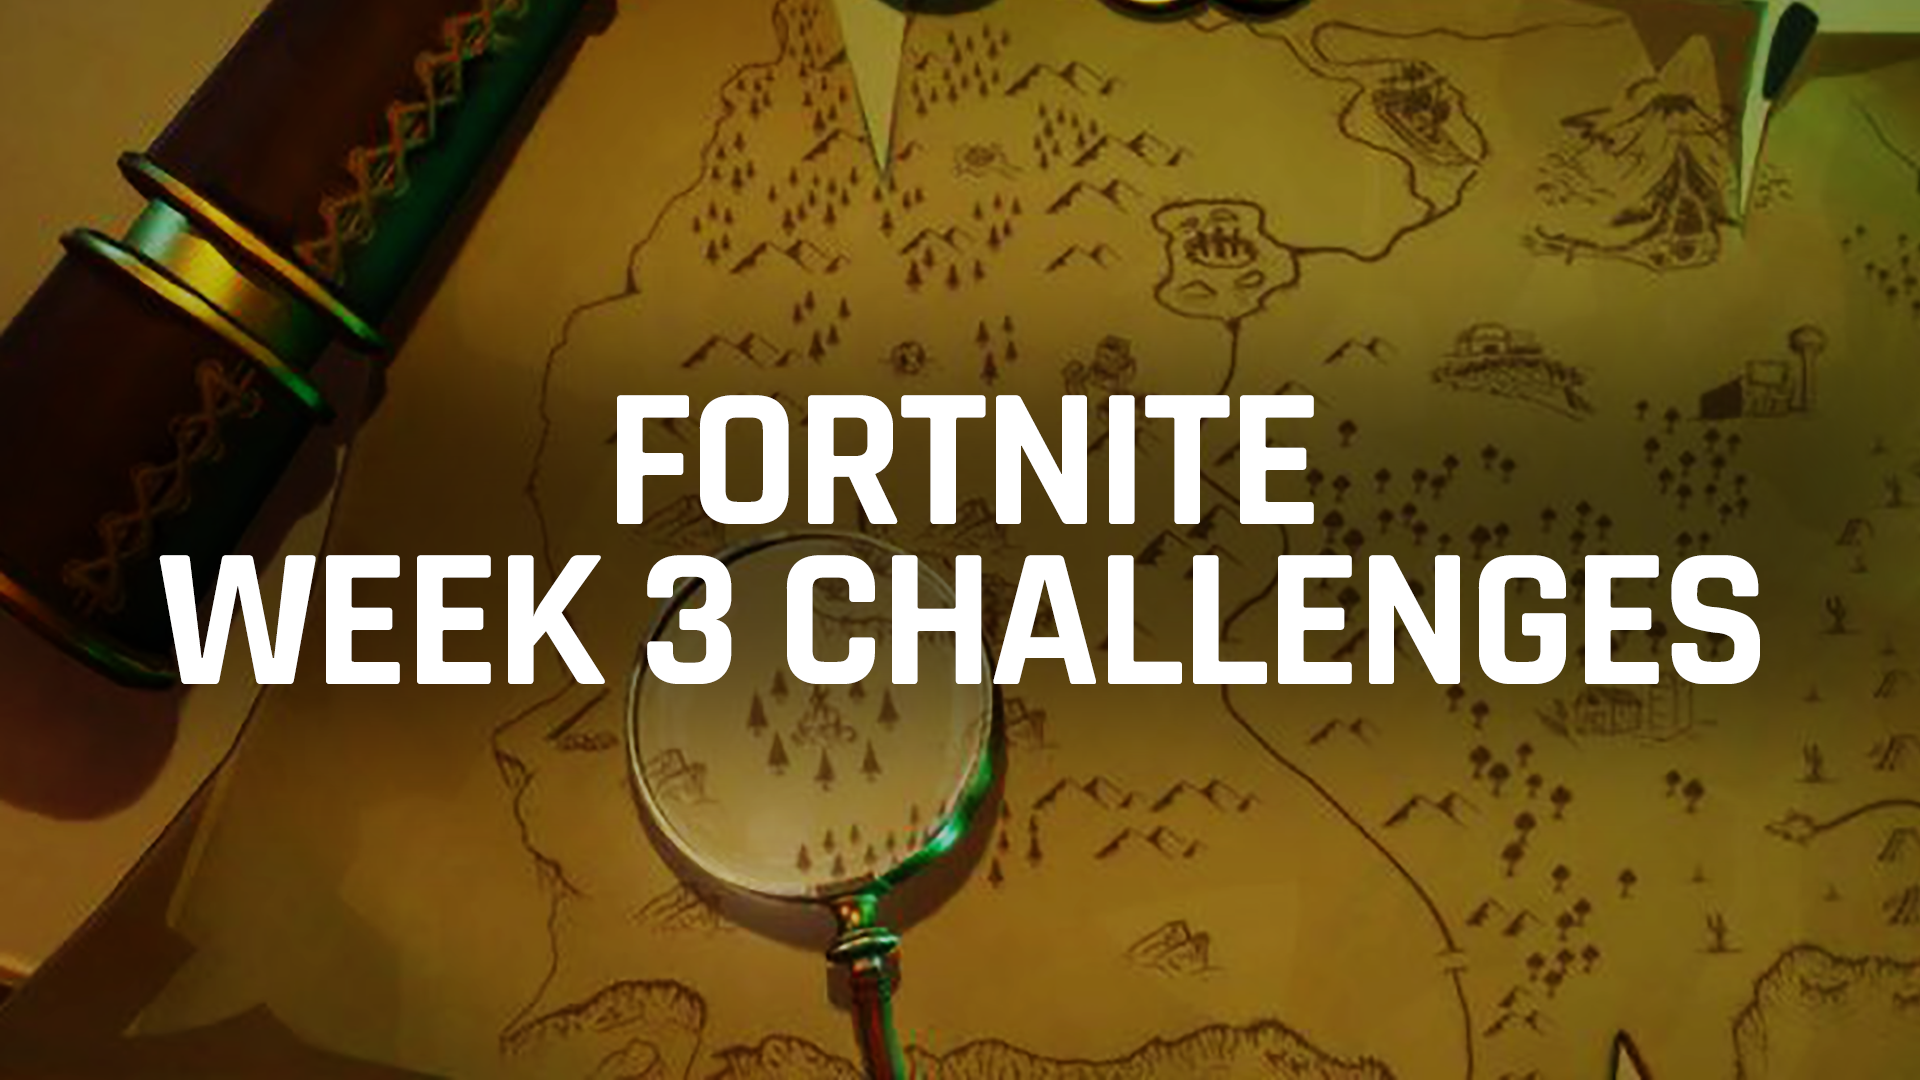 fortnite week 3 challenges how to find where magnifying glass sits place trap slot items sporting news - fortnite search where the magnifying glass sits on treasure map